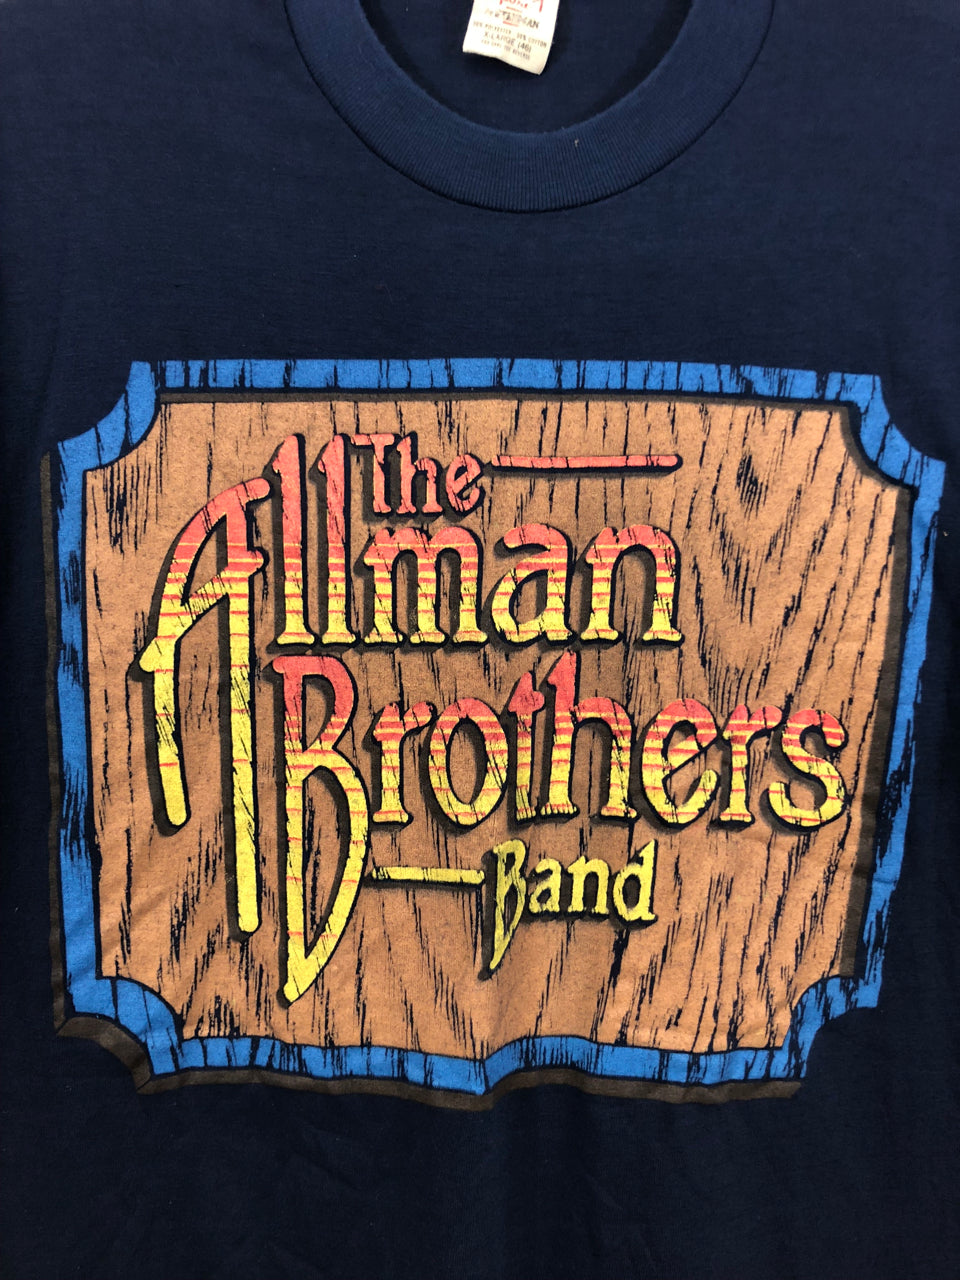 The Allman Brothers Band T-Shirt